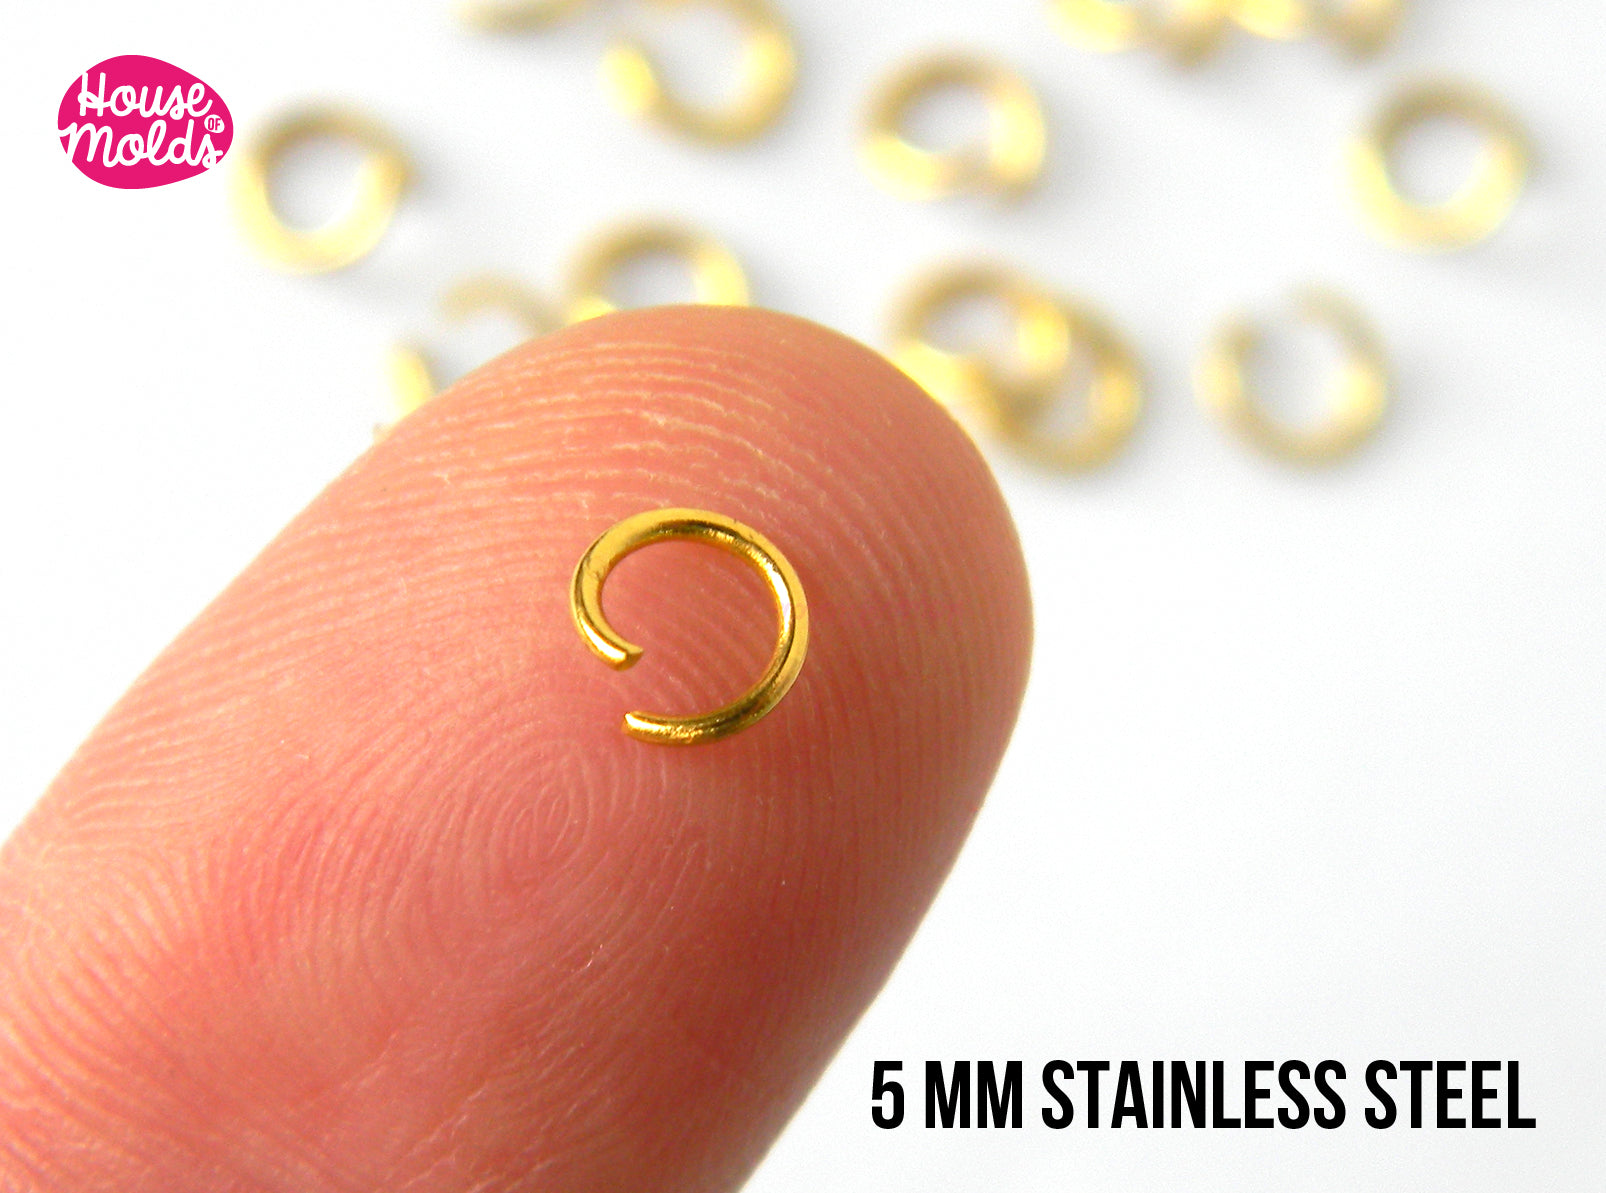 Gold Finish Open Jump Rings, Metal Jewelry Findings, 4mm, 6mm and